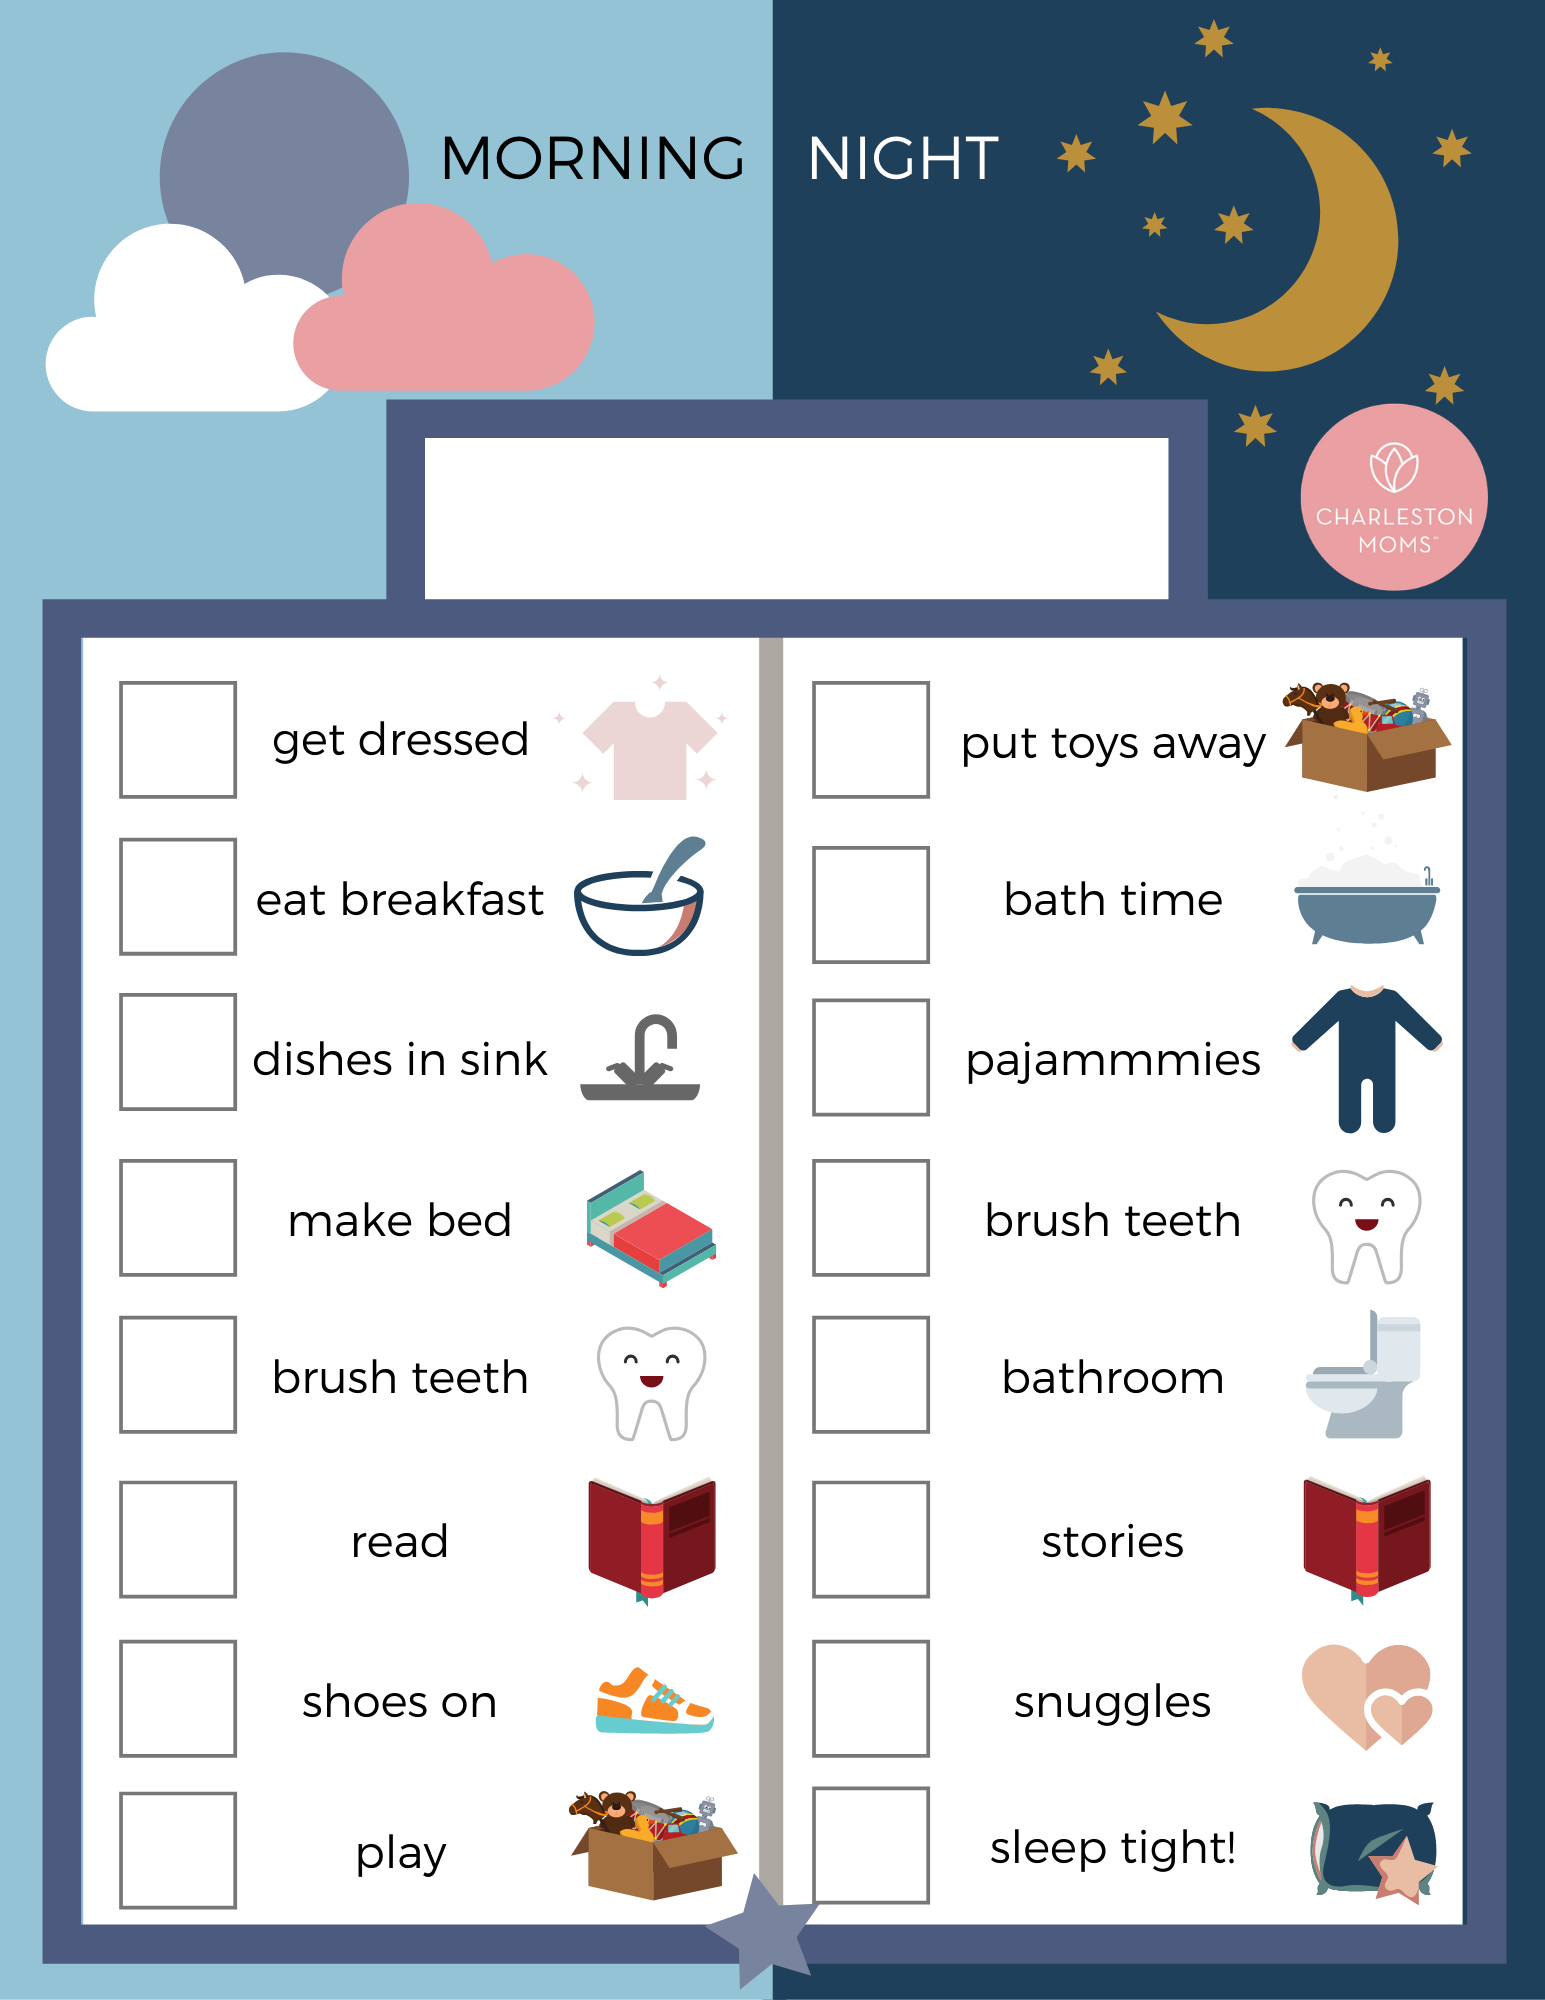 Free Printable Morning And Evening Routine Charts